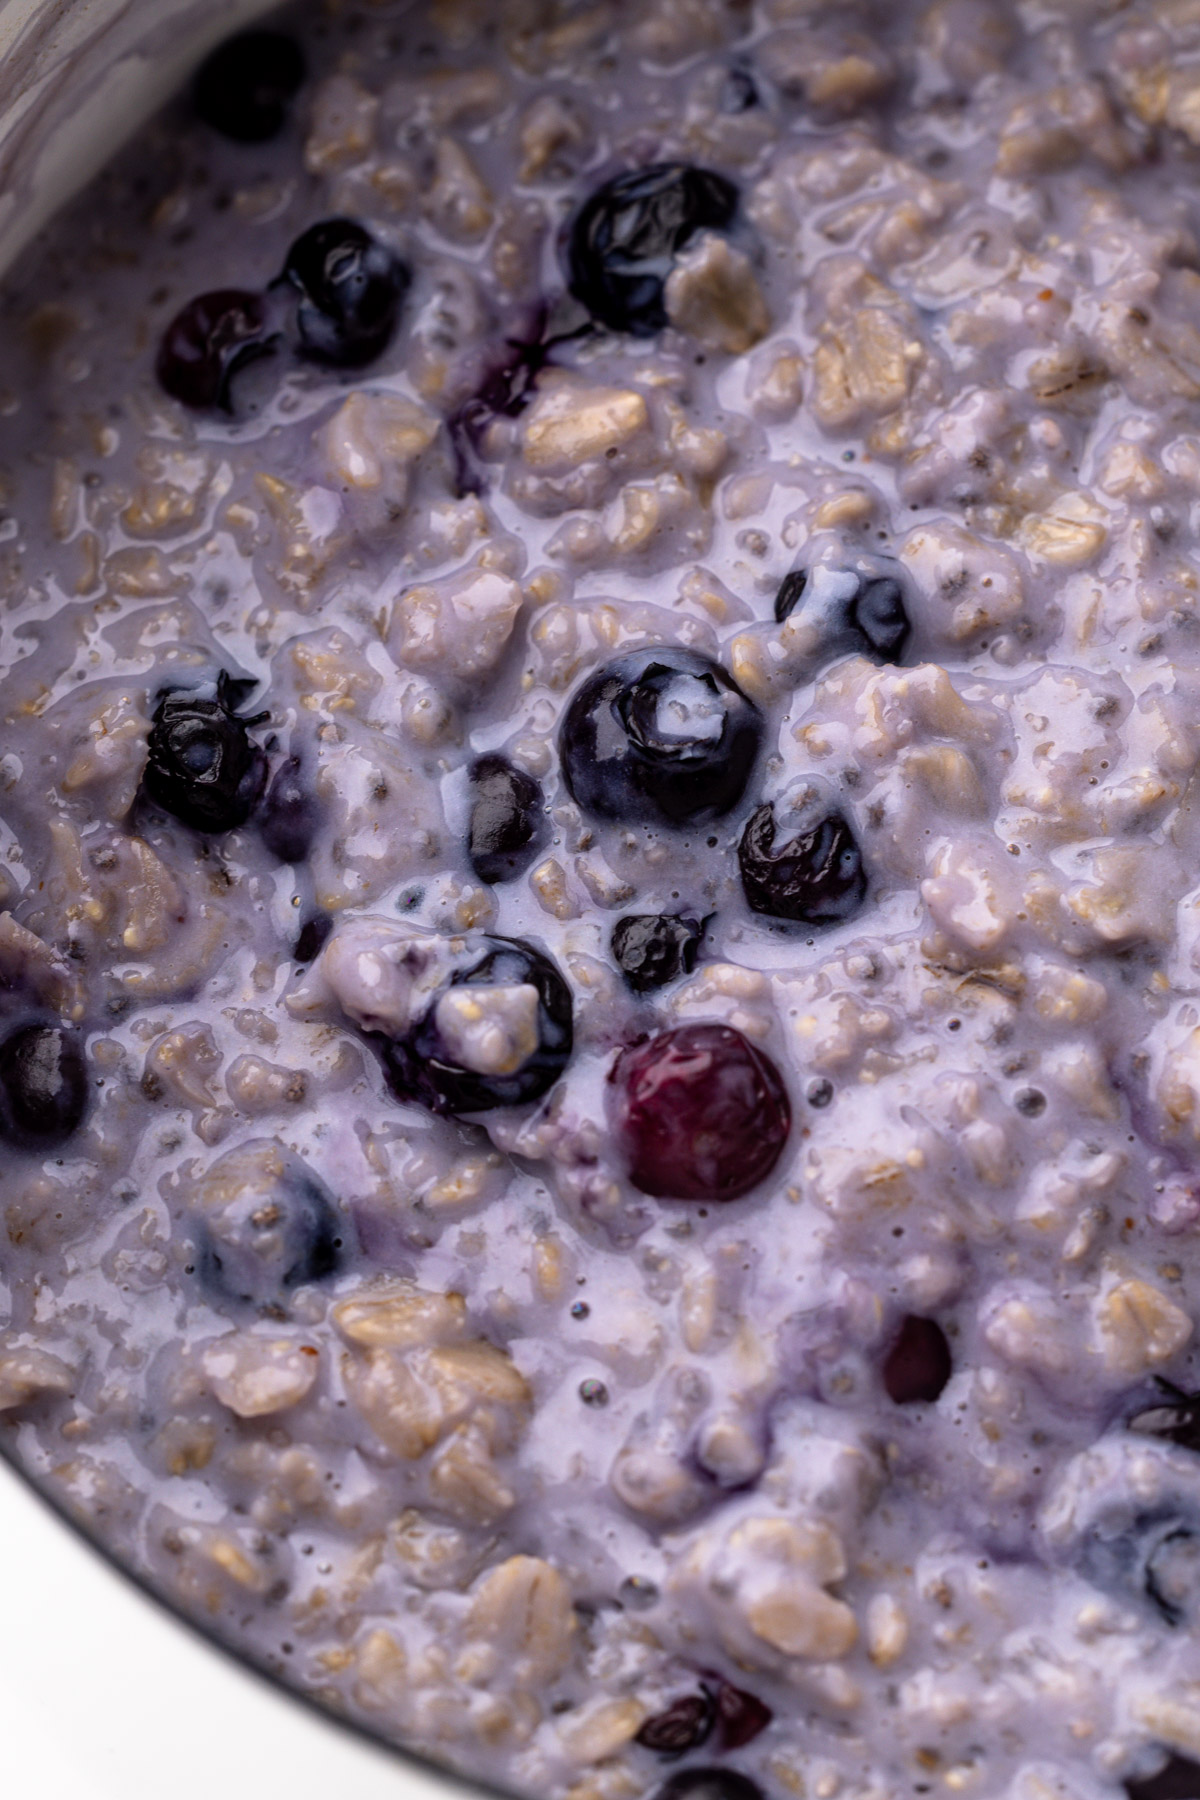 Blueberry oatmeal in a pot.